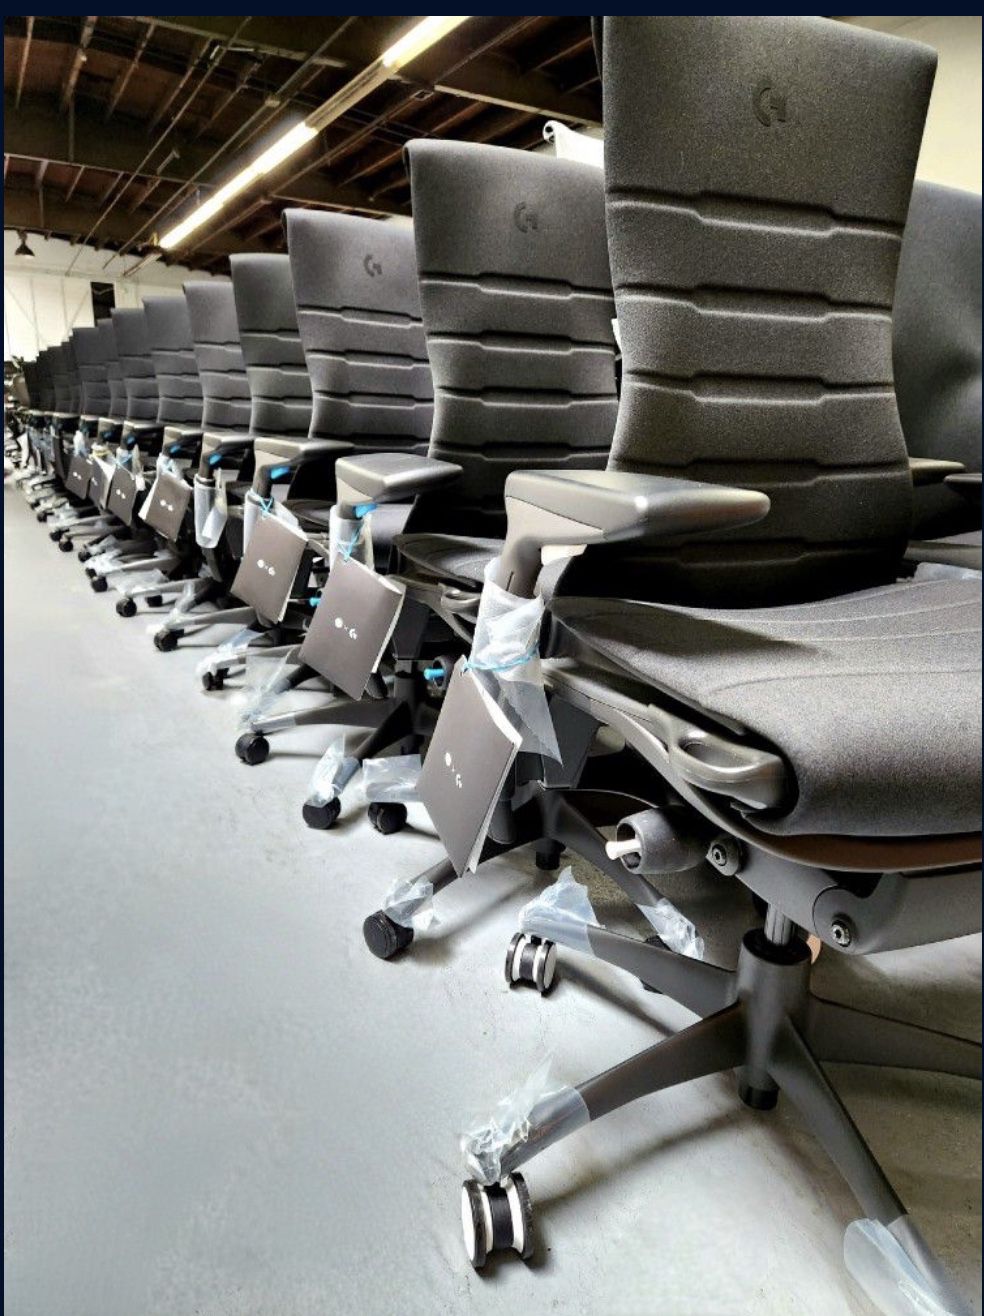 LARGEST INVENTORY OF HERMAN MILLER EMBODY CHAIRS STANDARD & LOGITECH ALL IN STOCK PICK-UP🔥DELIVERY🔥SHIPPING🔥 GUARANTEED LOWEST PRICES🔥